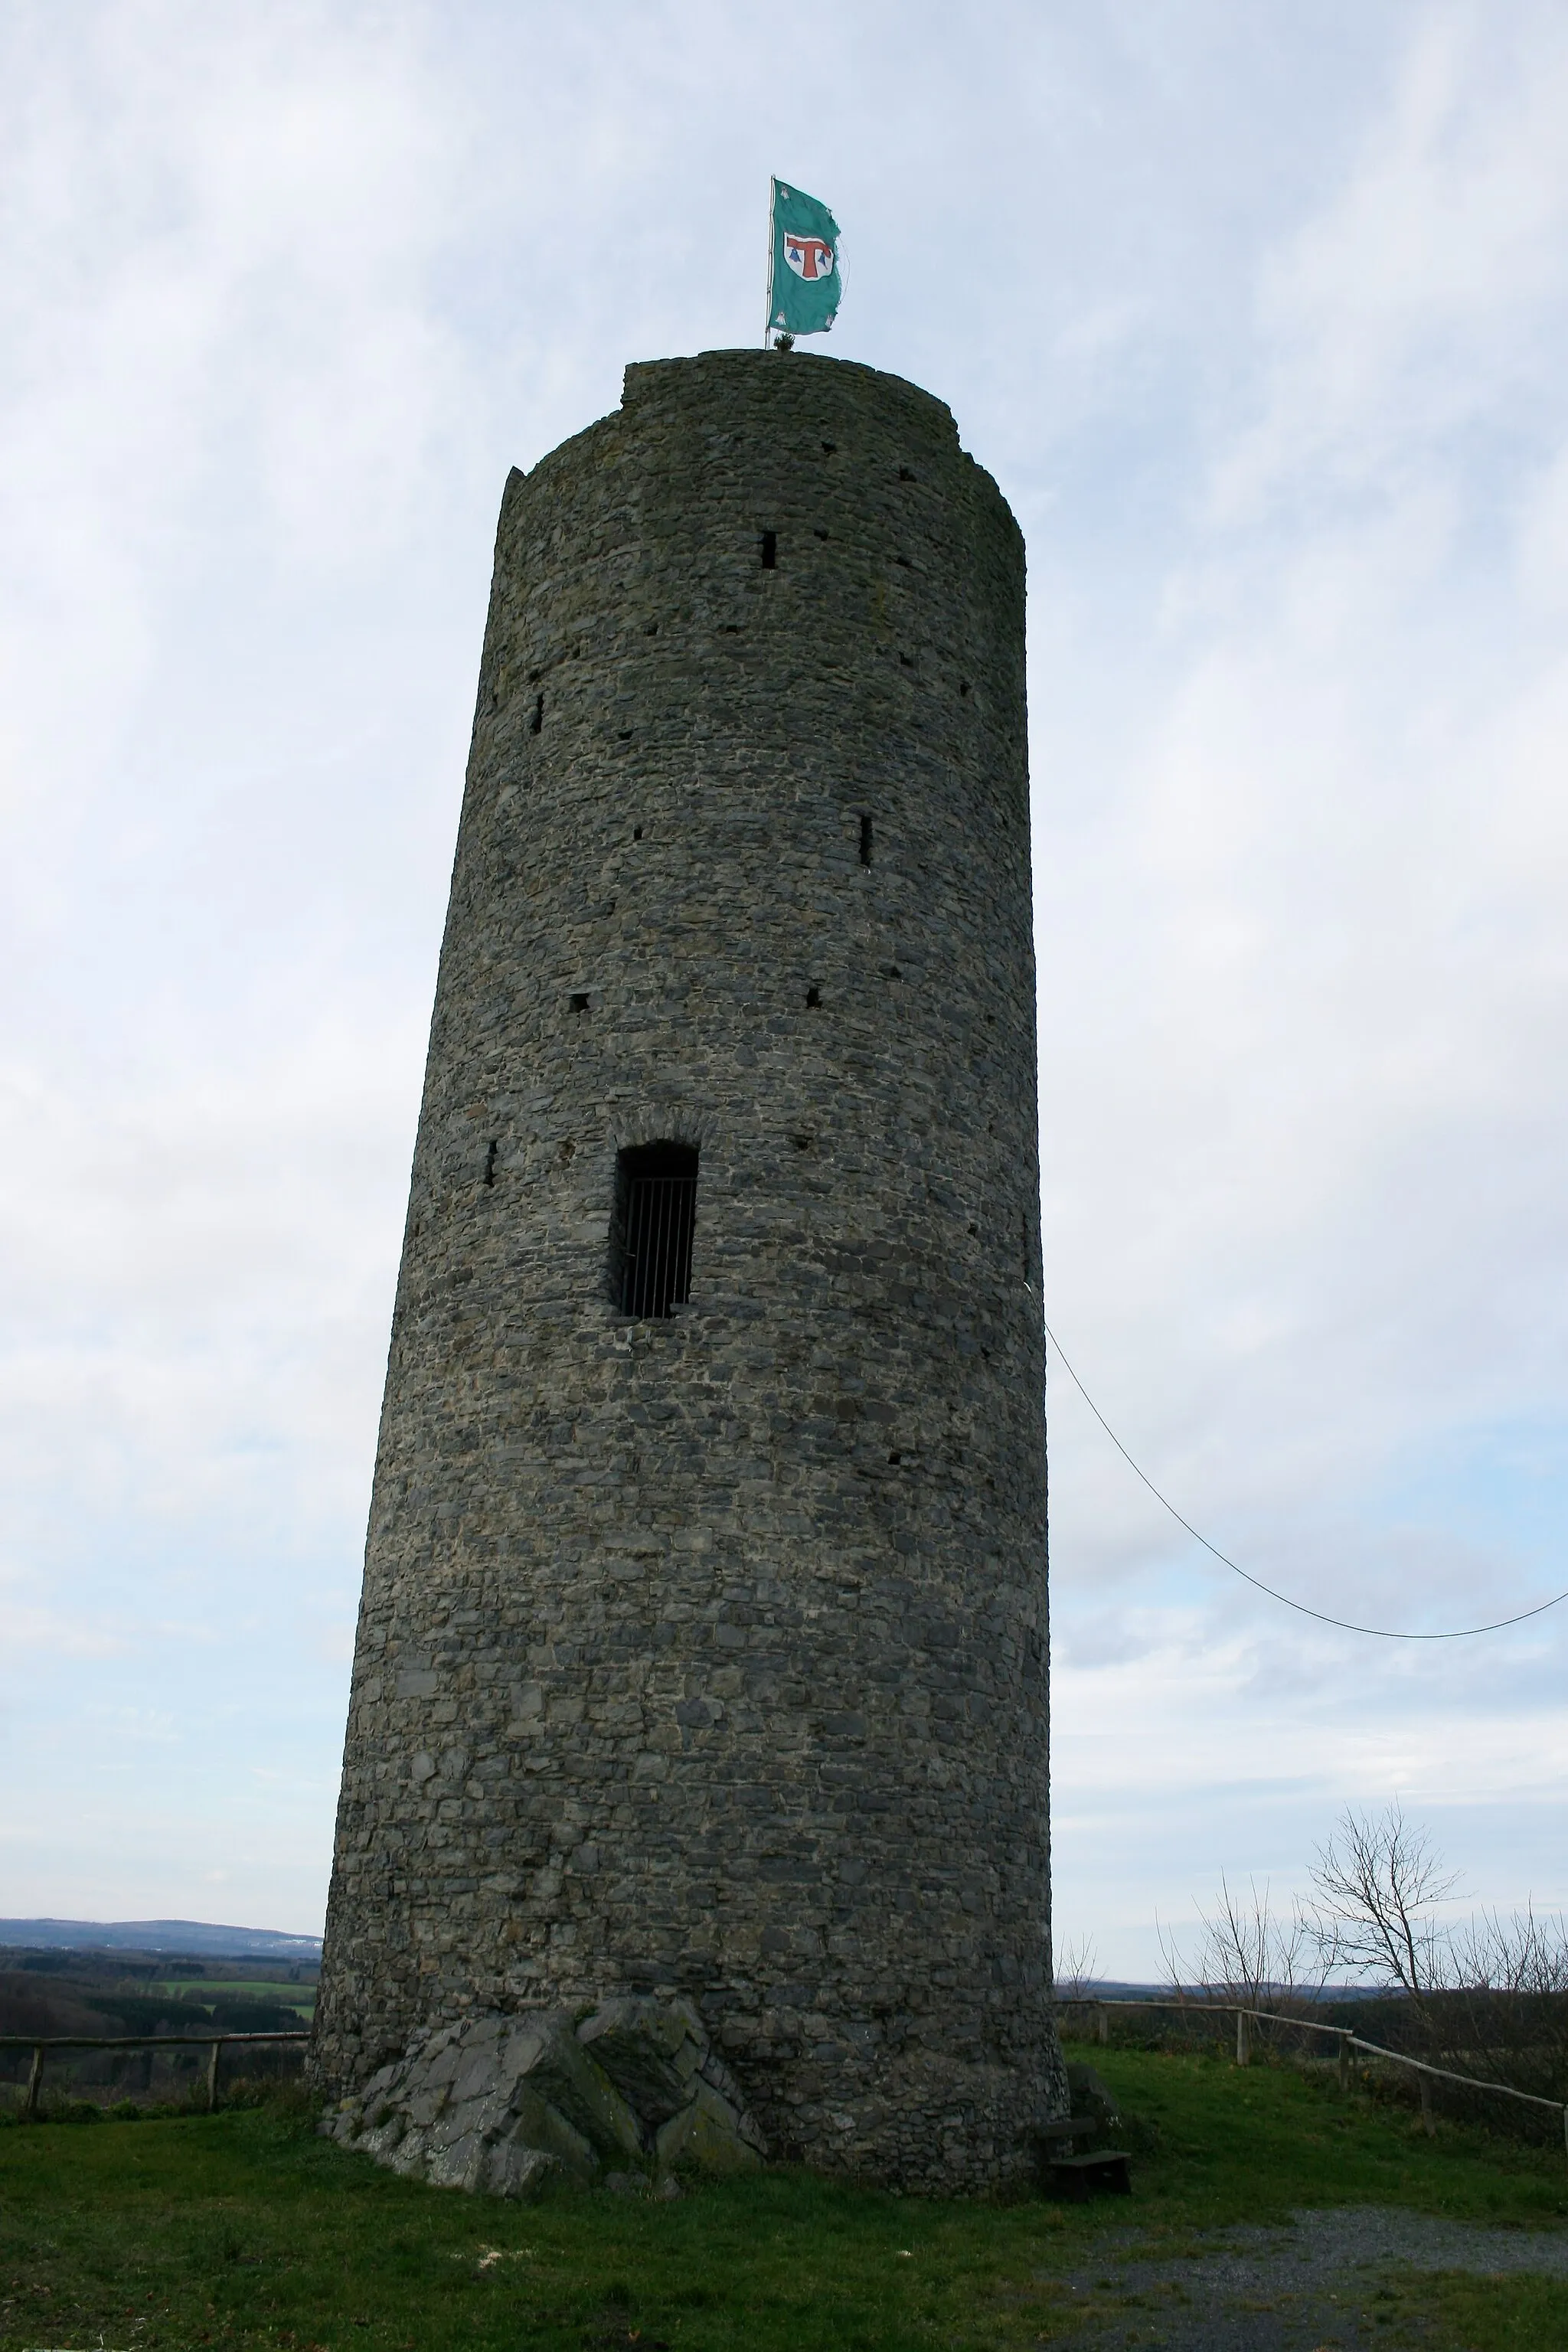 Photo showing: The Tower of Burg Hartenfels (Castle), Germany